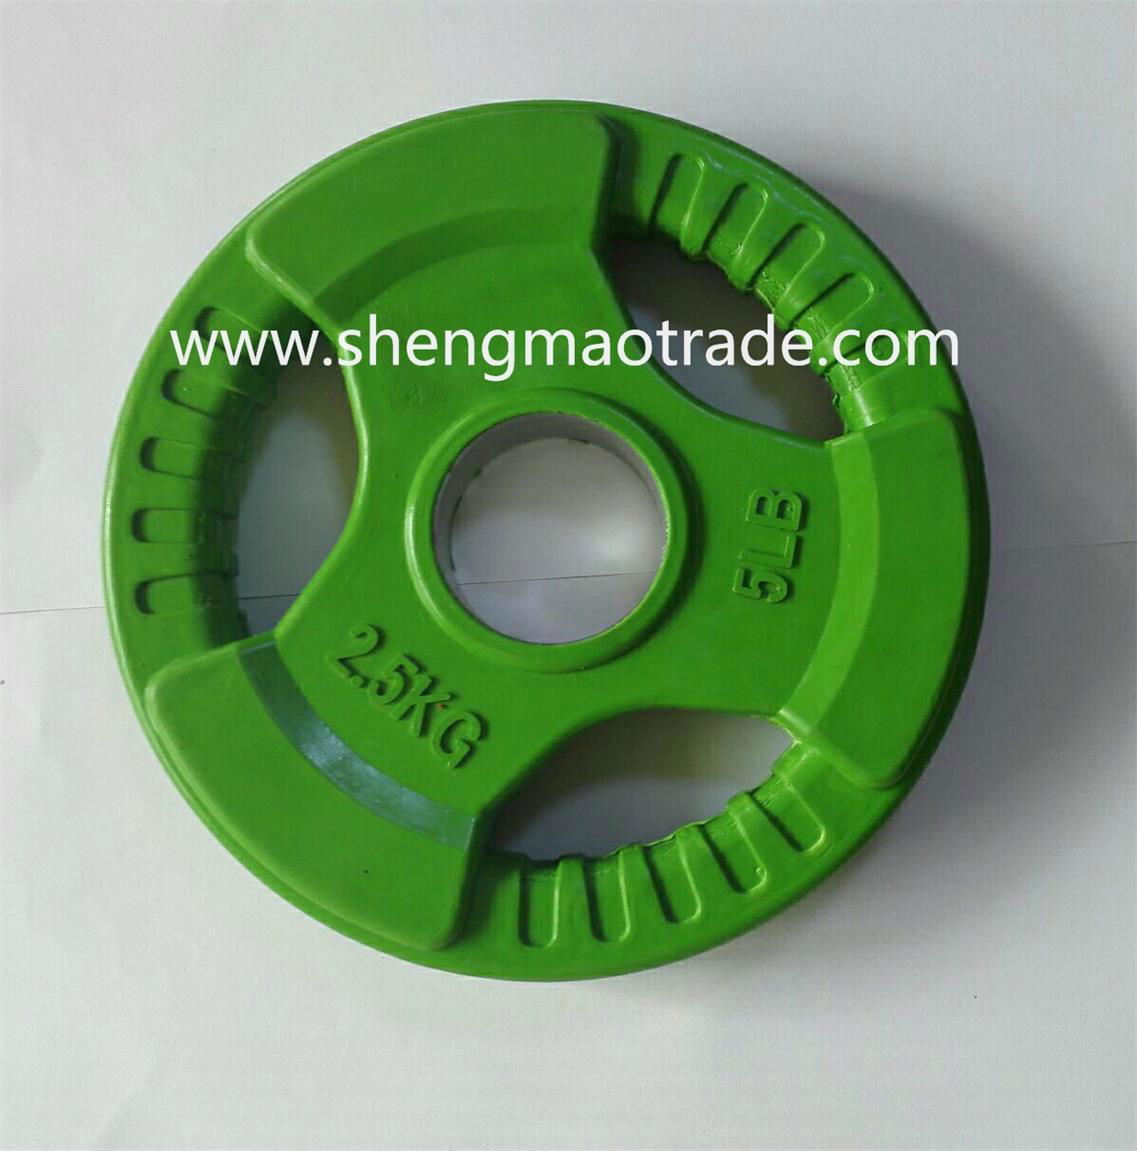 Colourful Tri-grip rubber coated plate  4